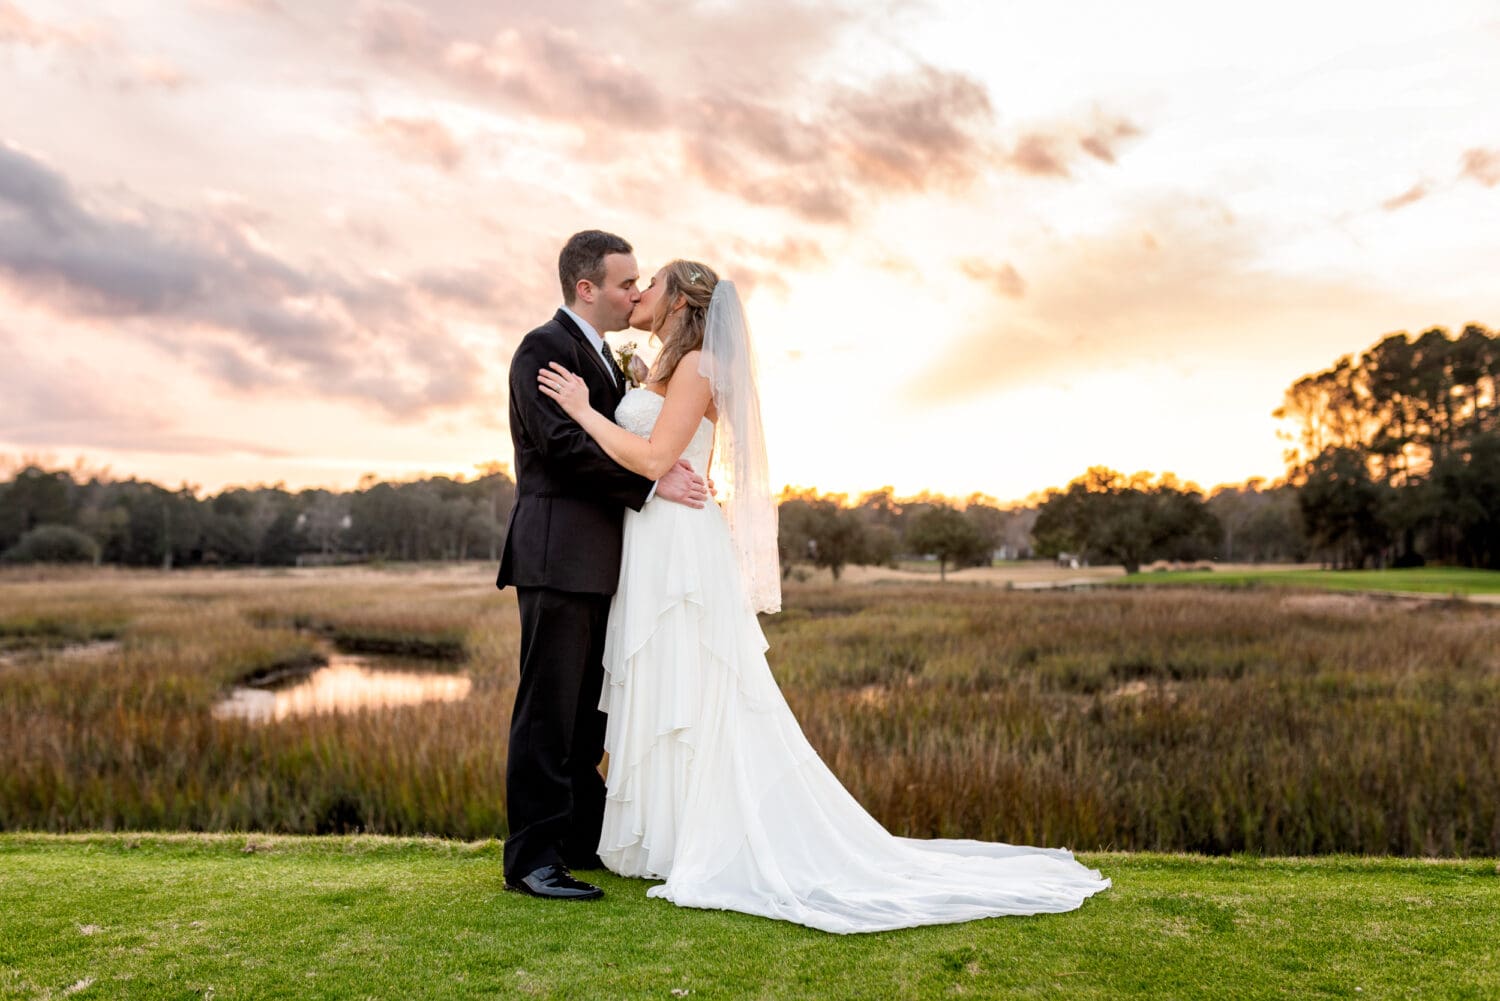 We had a great sunset at the end of yesterday's wedding pictures - Pawleys Plantation Golf & Country Club